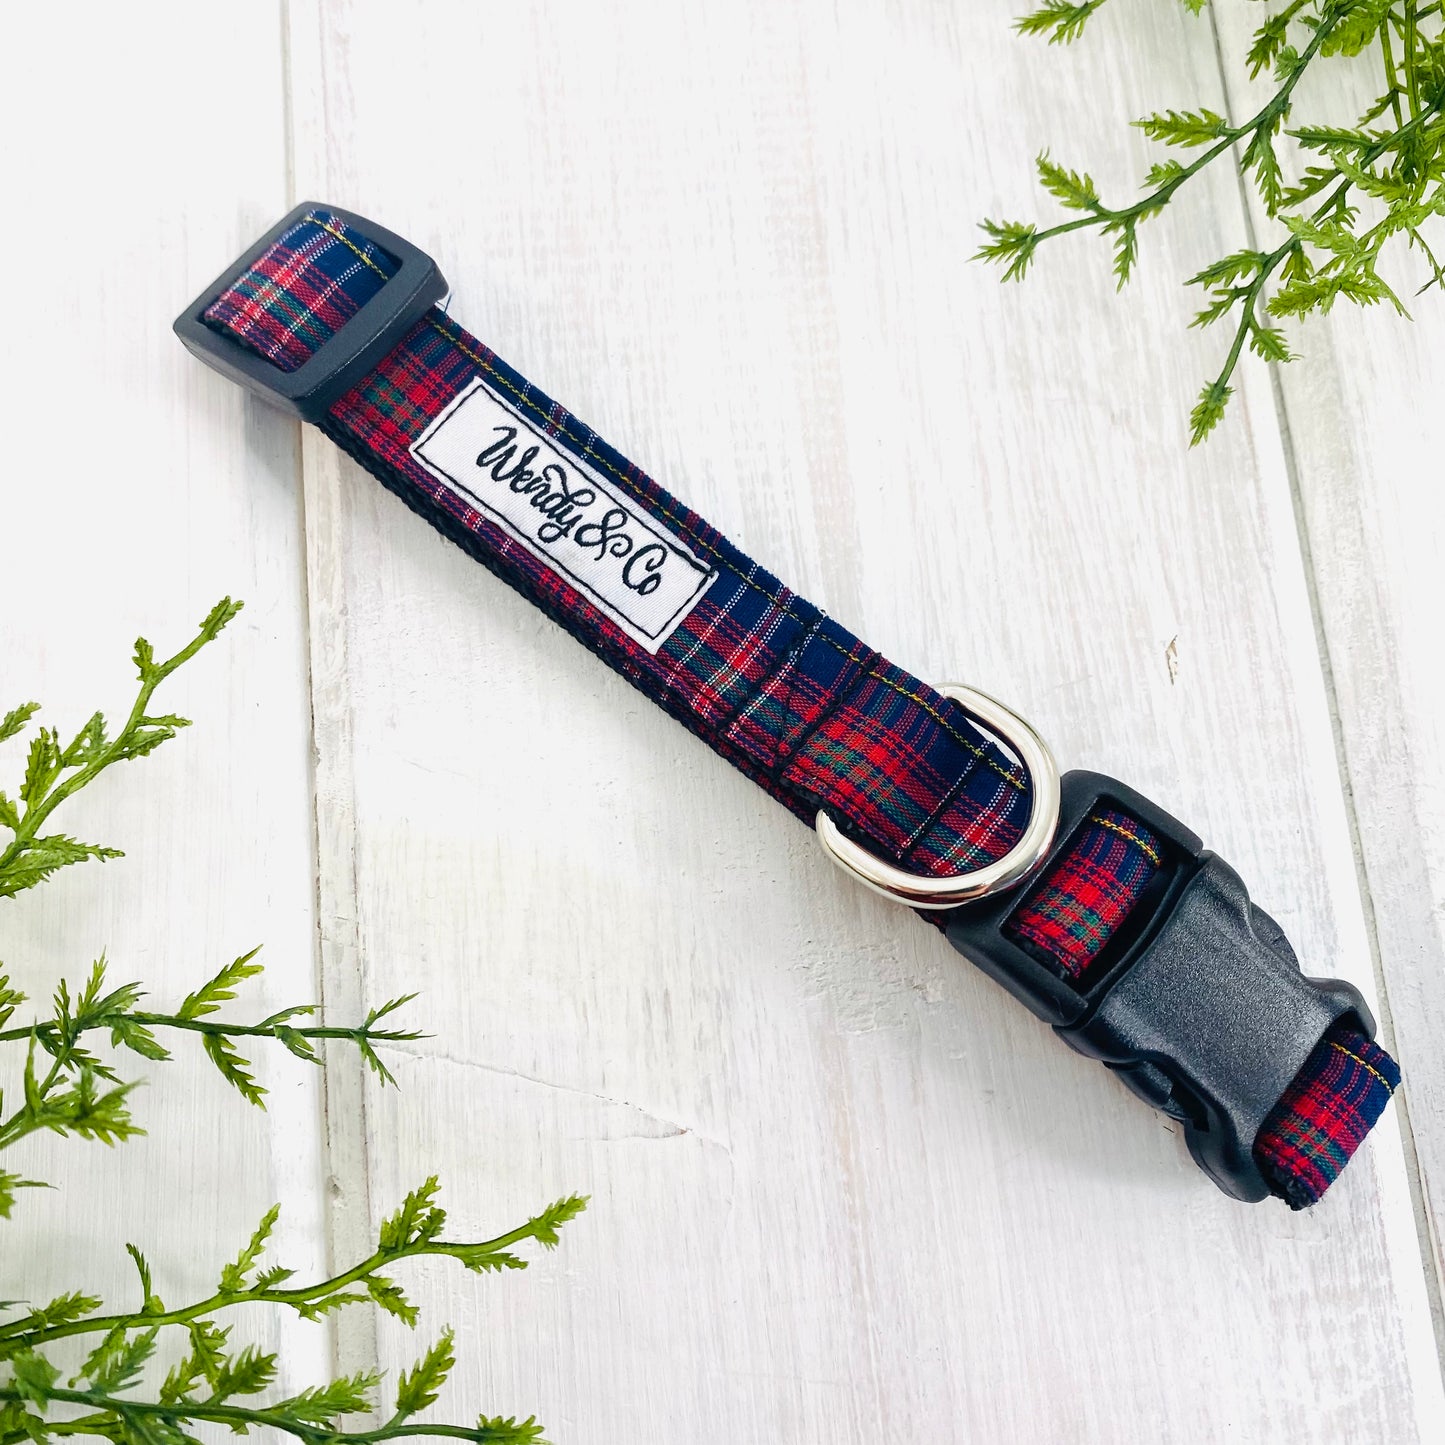 Dog collar in Tartan plaid with red and navy.